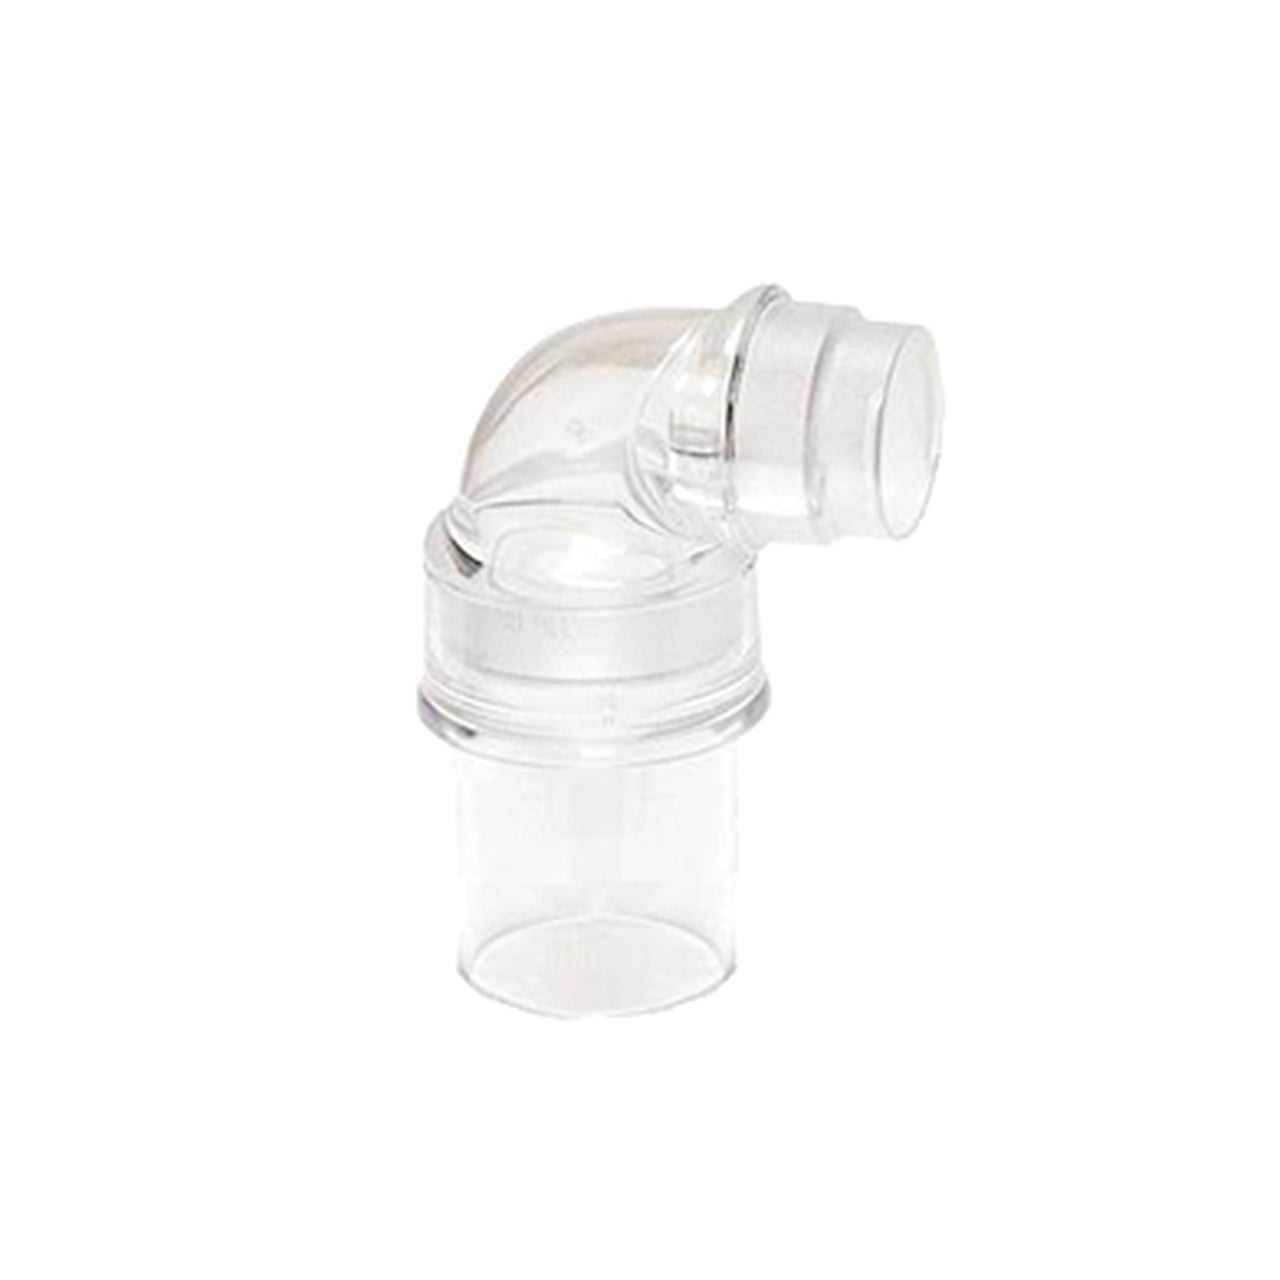 Fisher & Paykel Elbow and Swivel for Zest mask by Fisher & Paykel from Easy CPAP